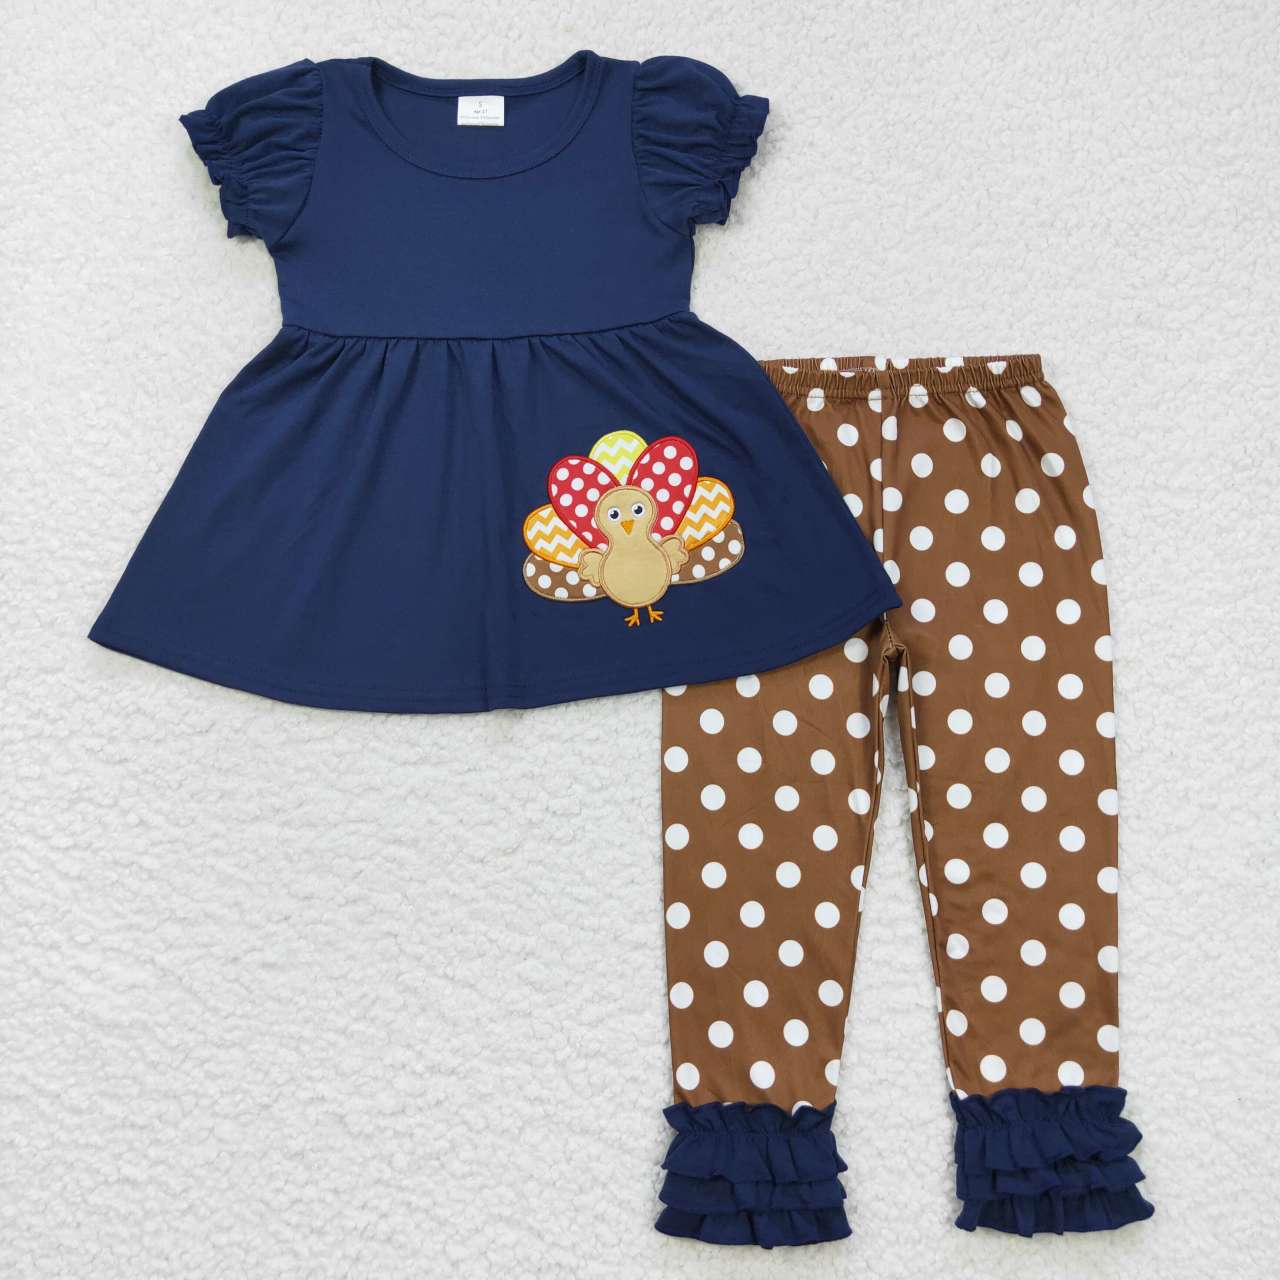 GSPO0795 Turkey embroidery navy tunic top dots ruffles pants girls Thanksgiving clothes set